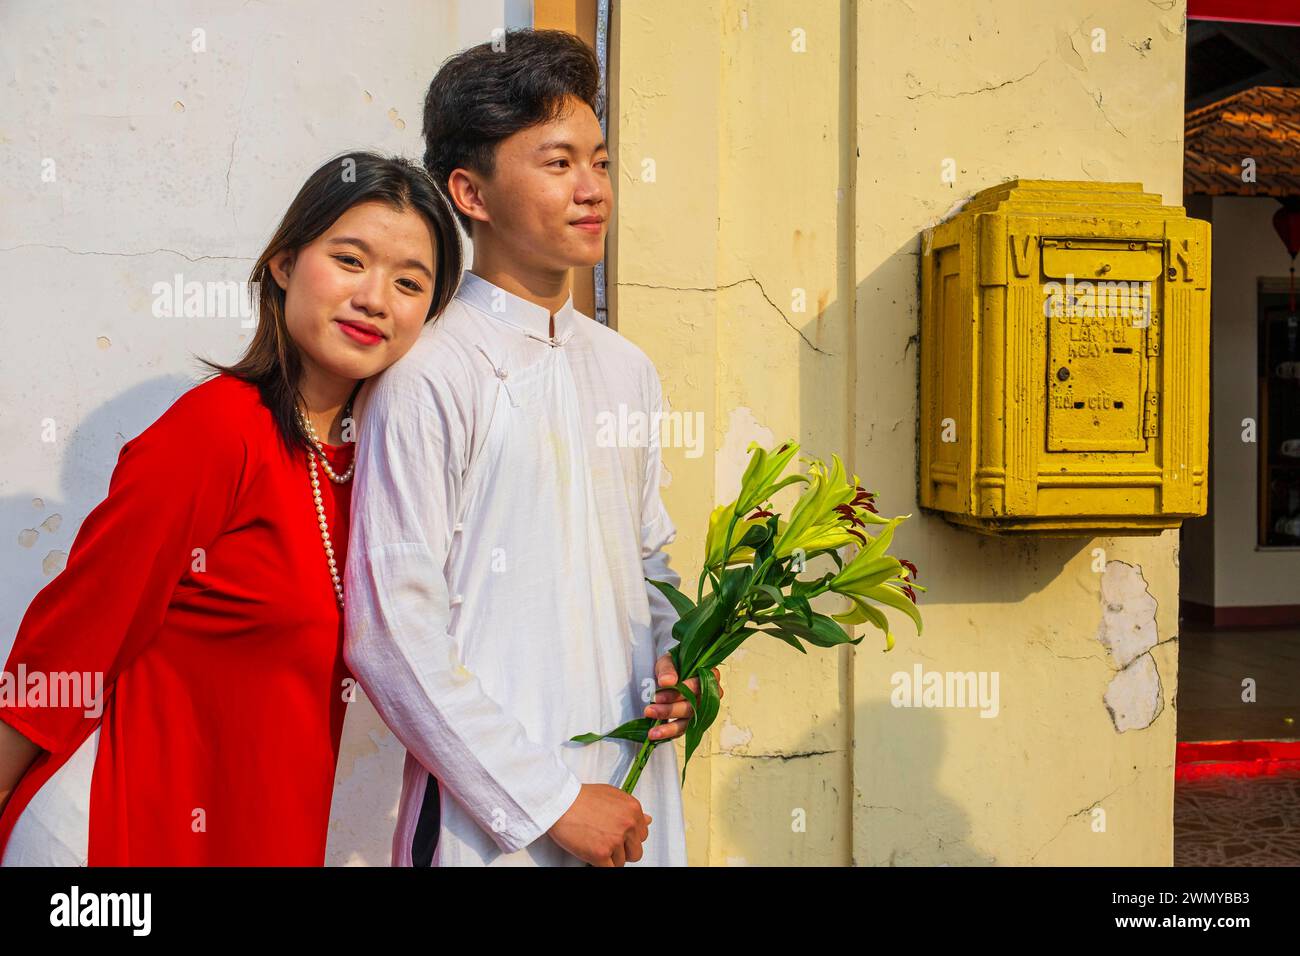 Vietnam, Mekong Delta, Can Tho, photo shooting in front of the old market building Stock Photo